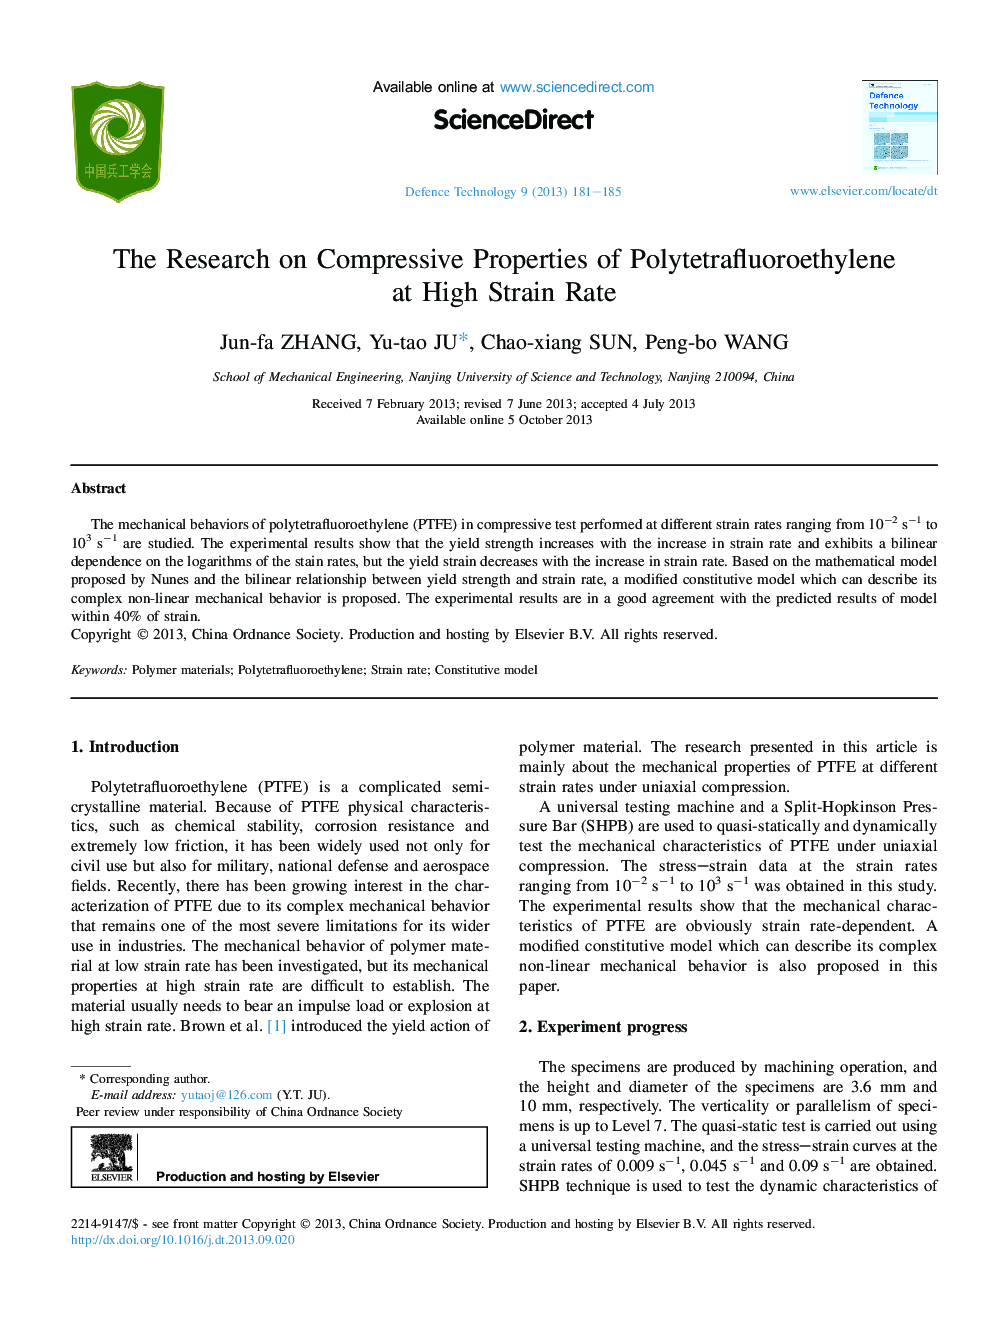 The Research on Compressive Properties of Polytetrafluoroethylene at High Strain Rate 